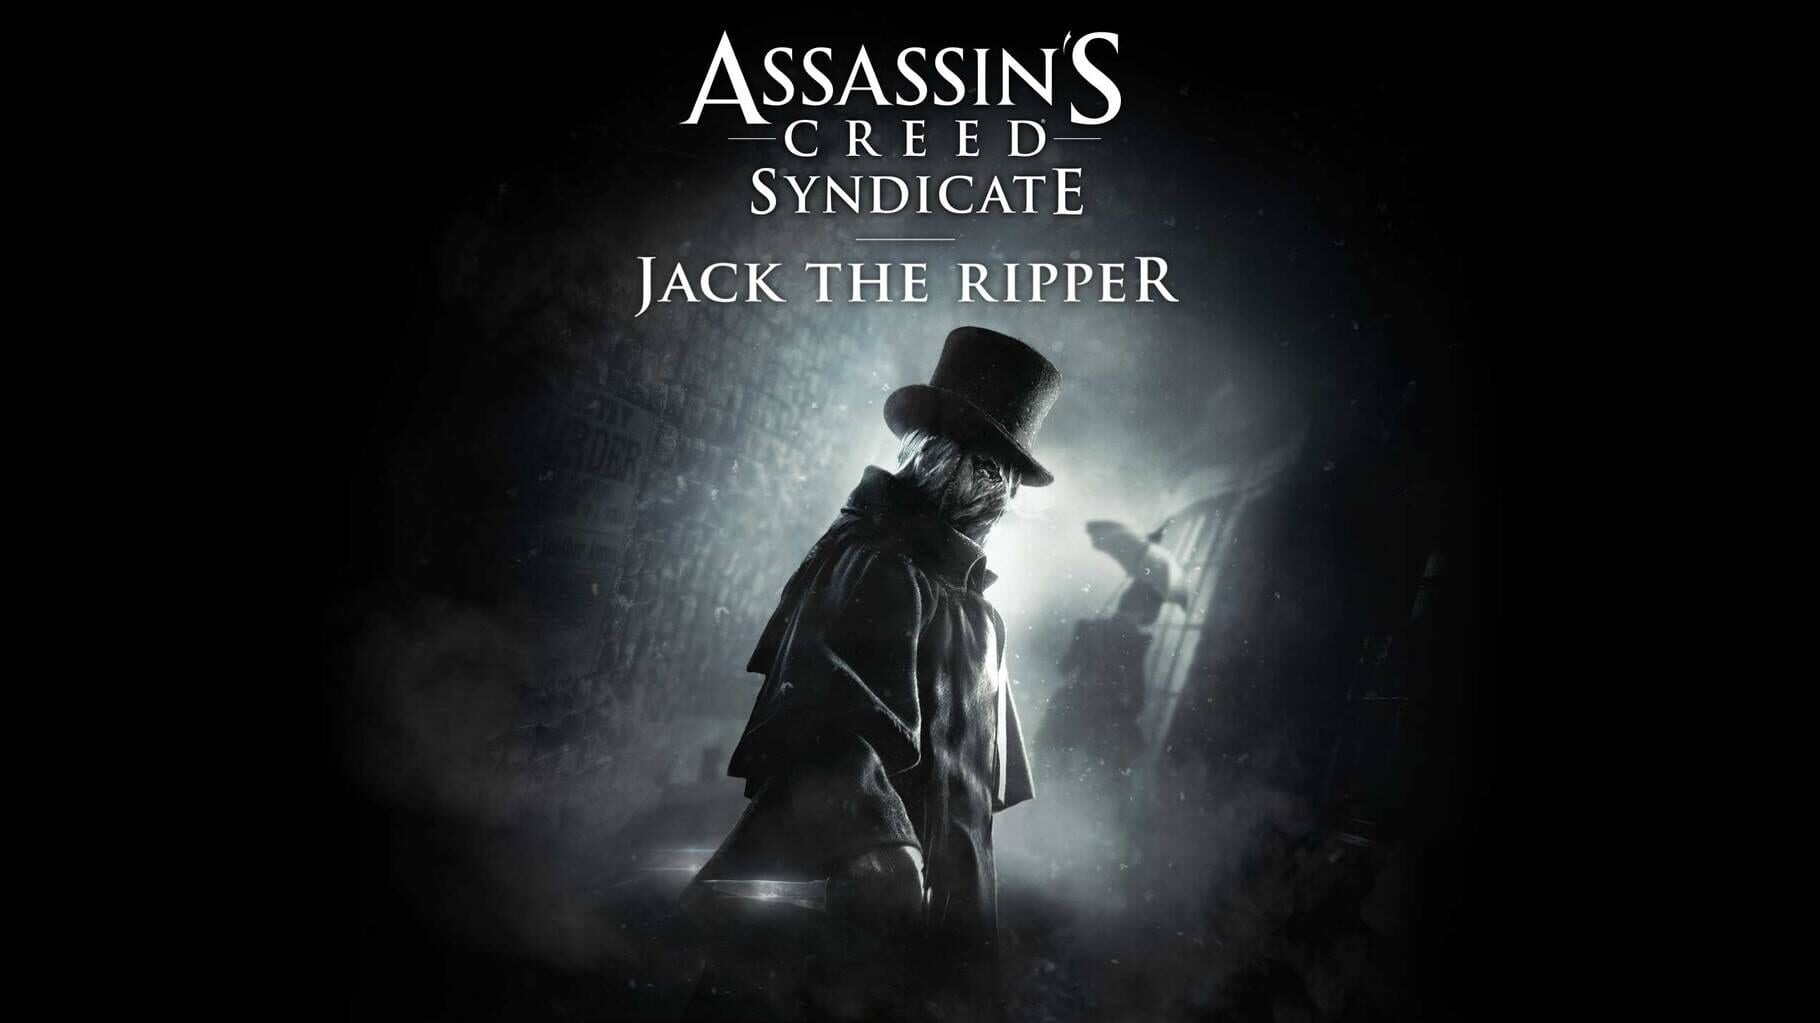 Arte - Assassin's Creed Syndicate: Jack the Ripper